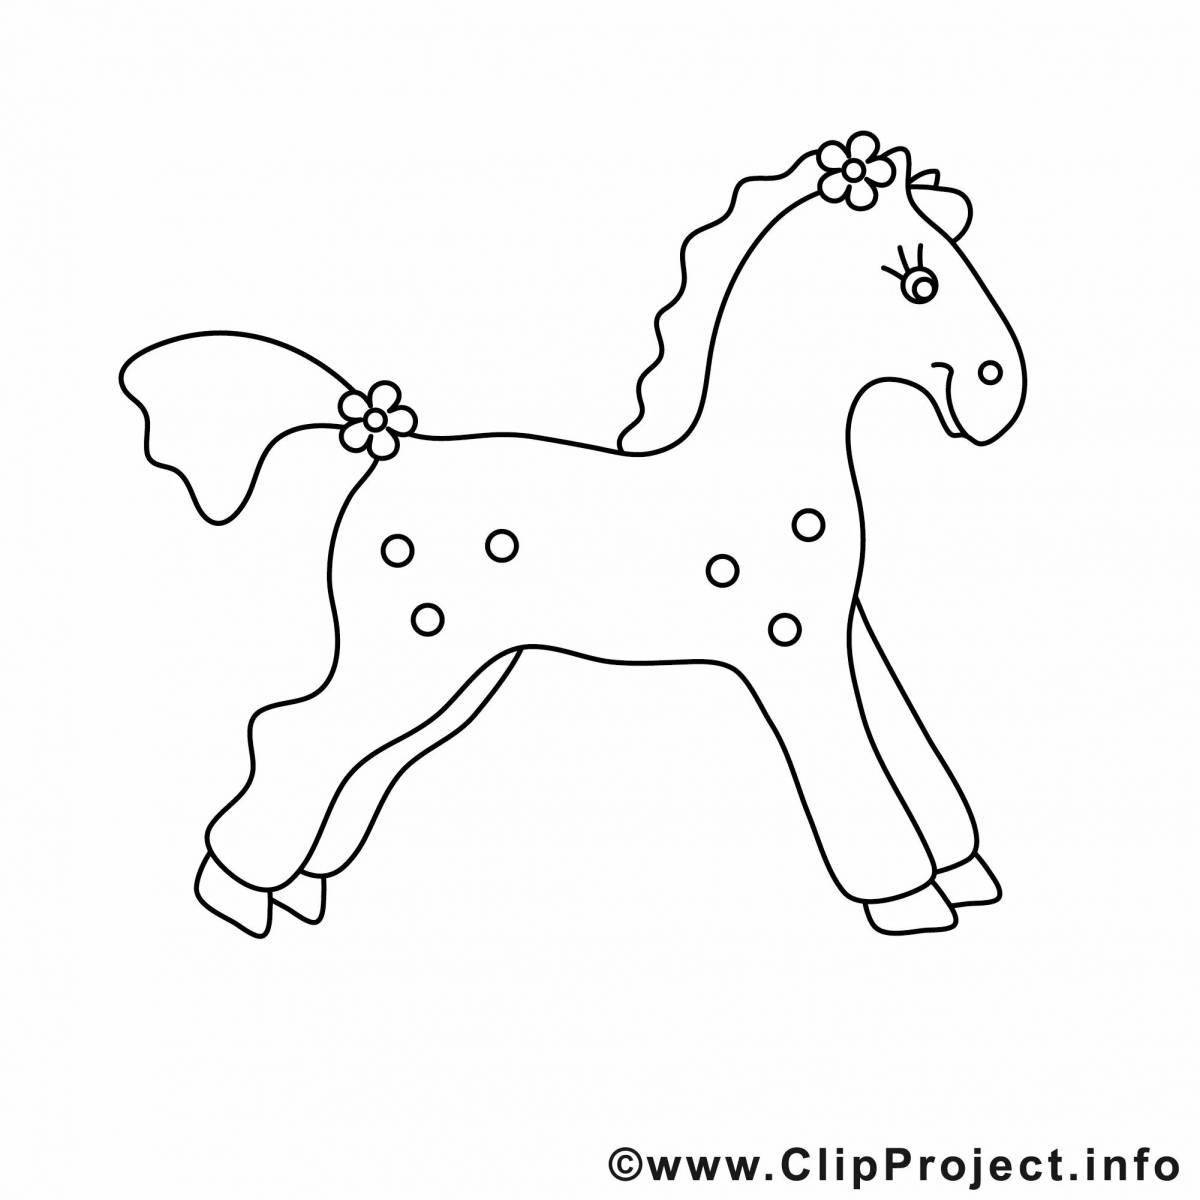 Coloring page nice gzhel horse